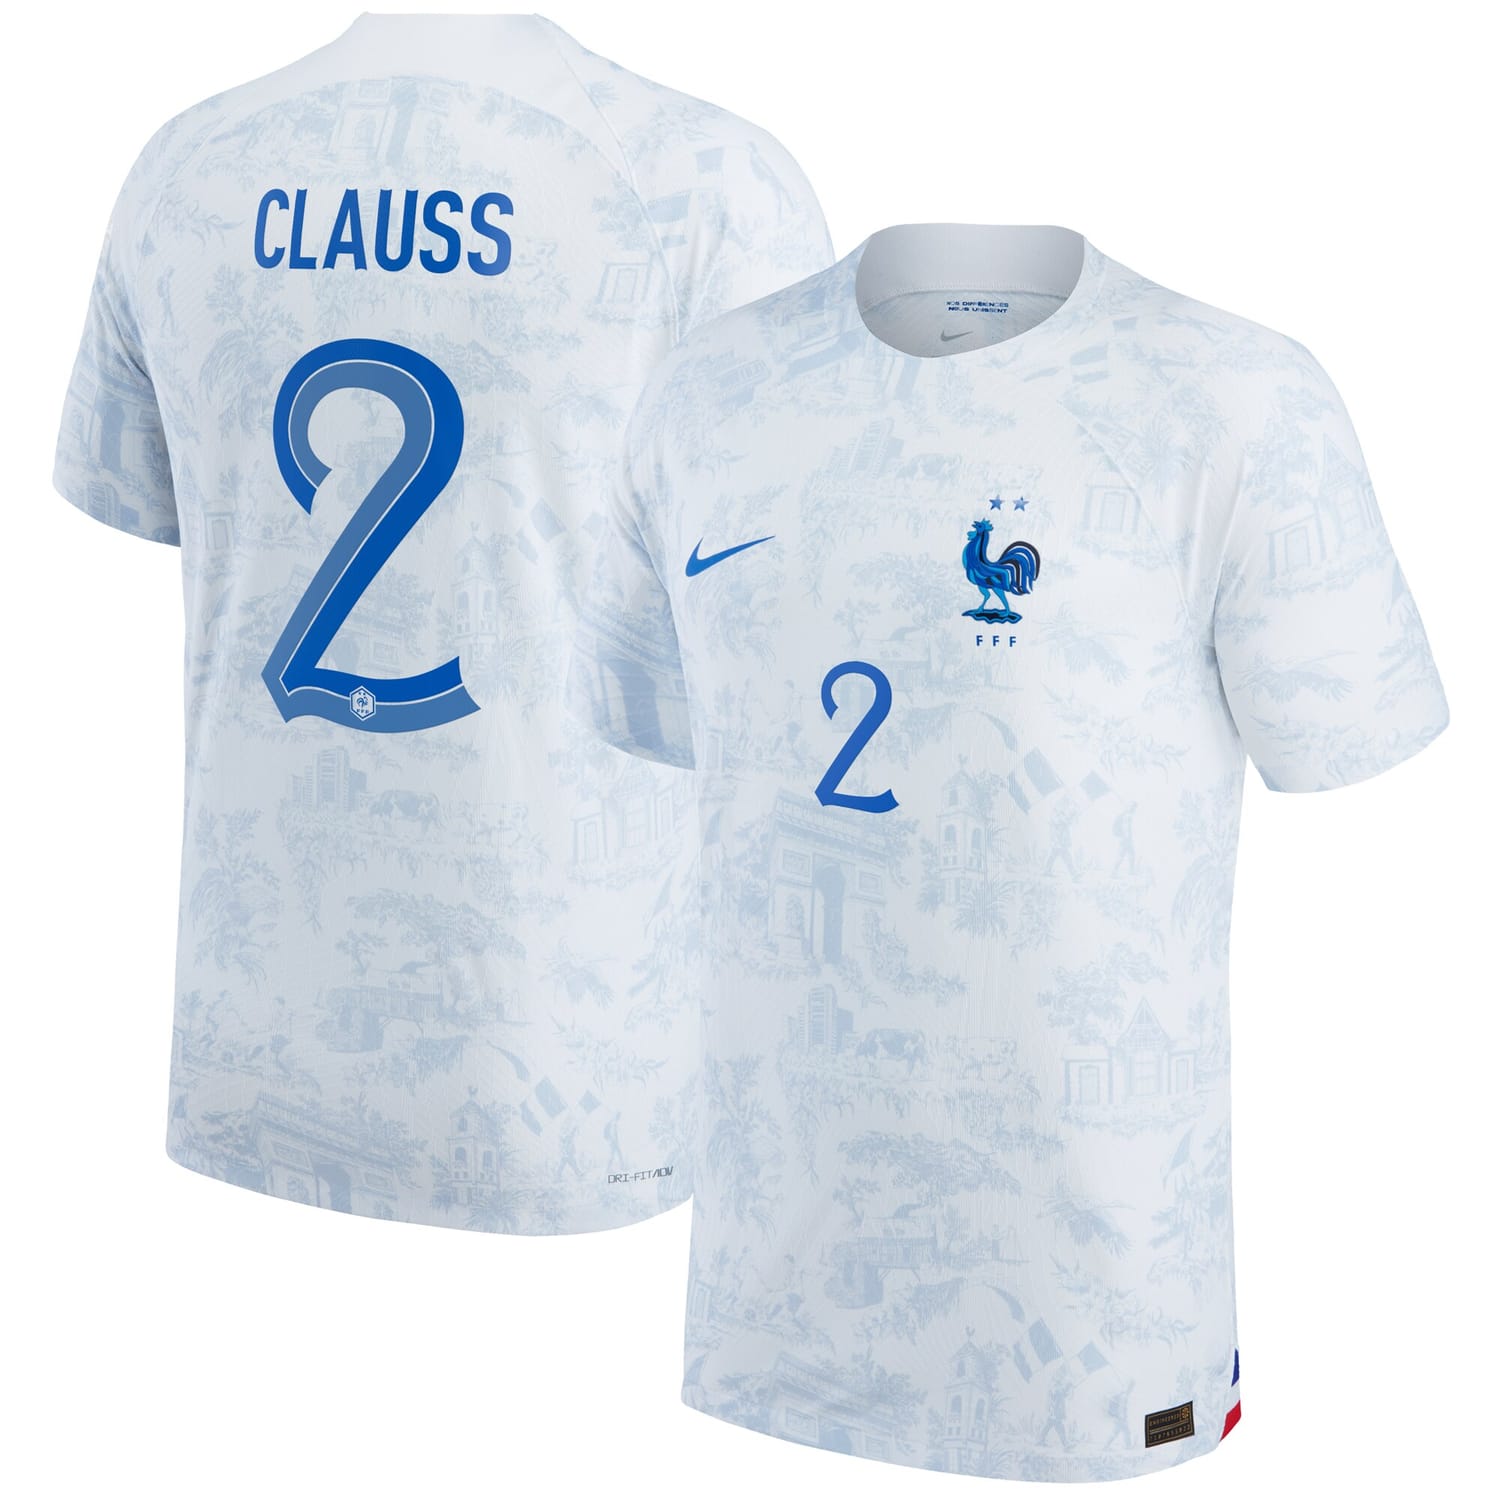 France National Team Away Authentic Jersey Shirt 2022 player Jonathan Clauss 2 printing for Men